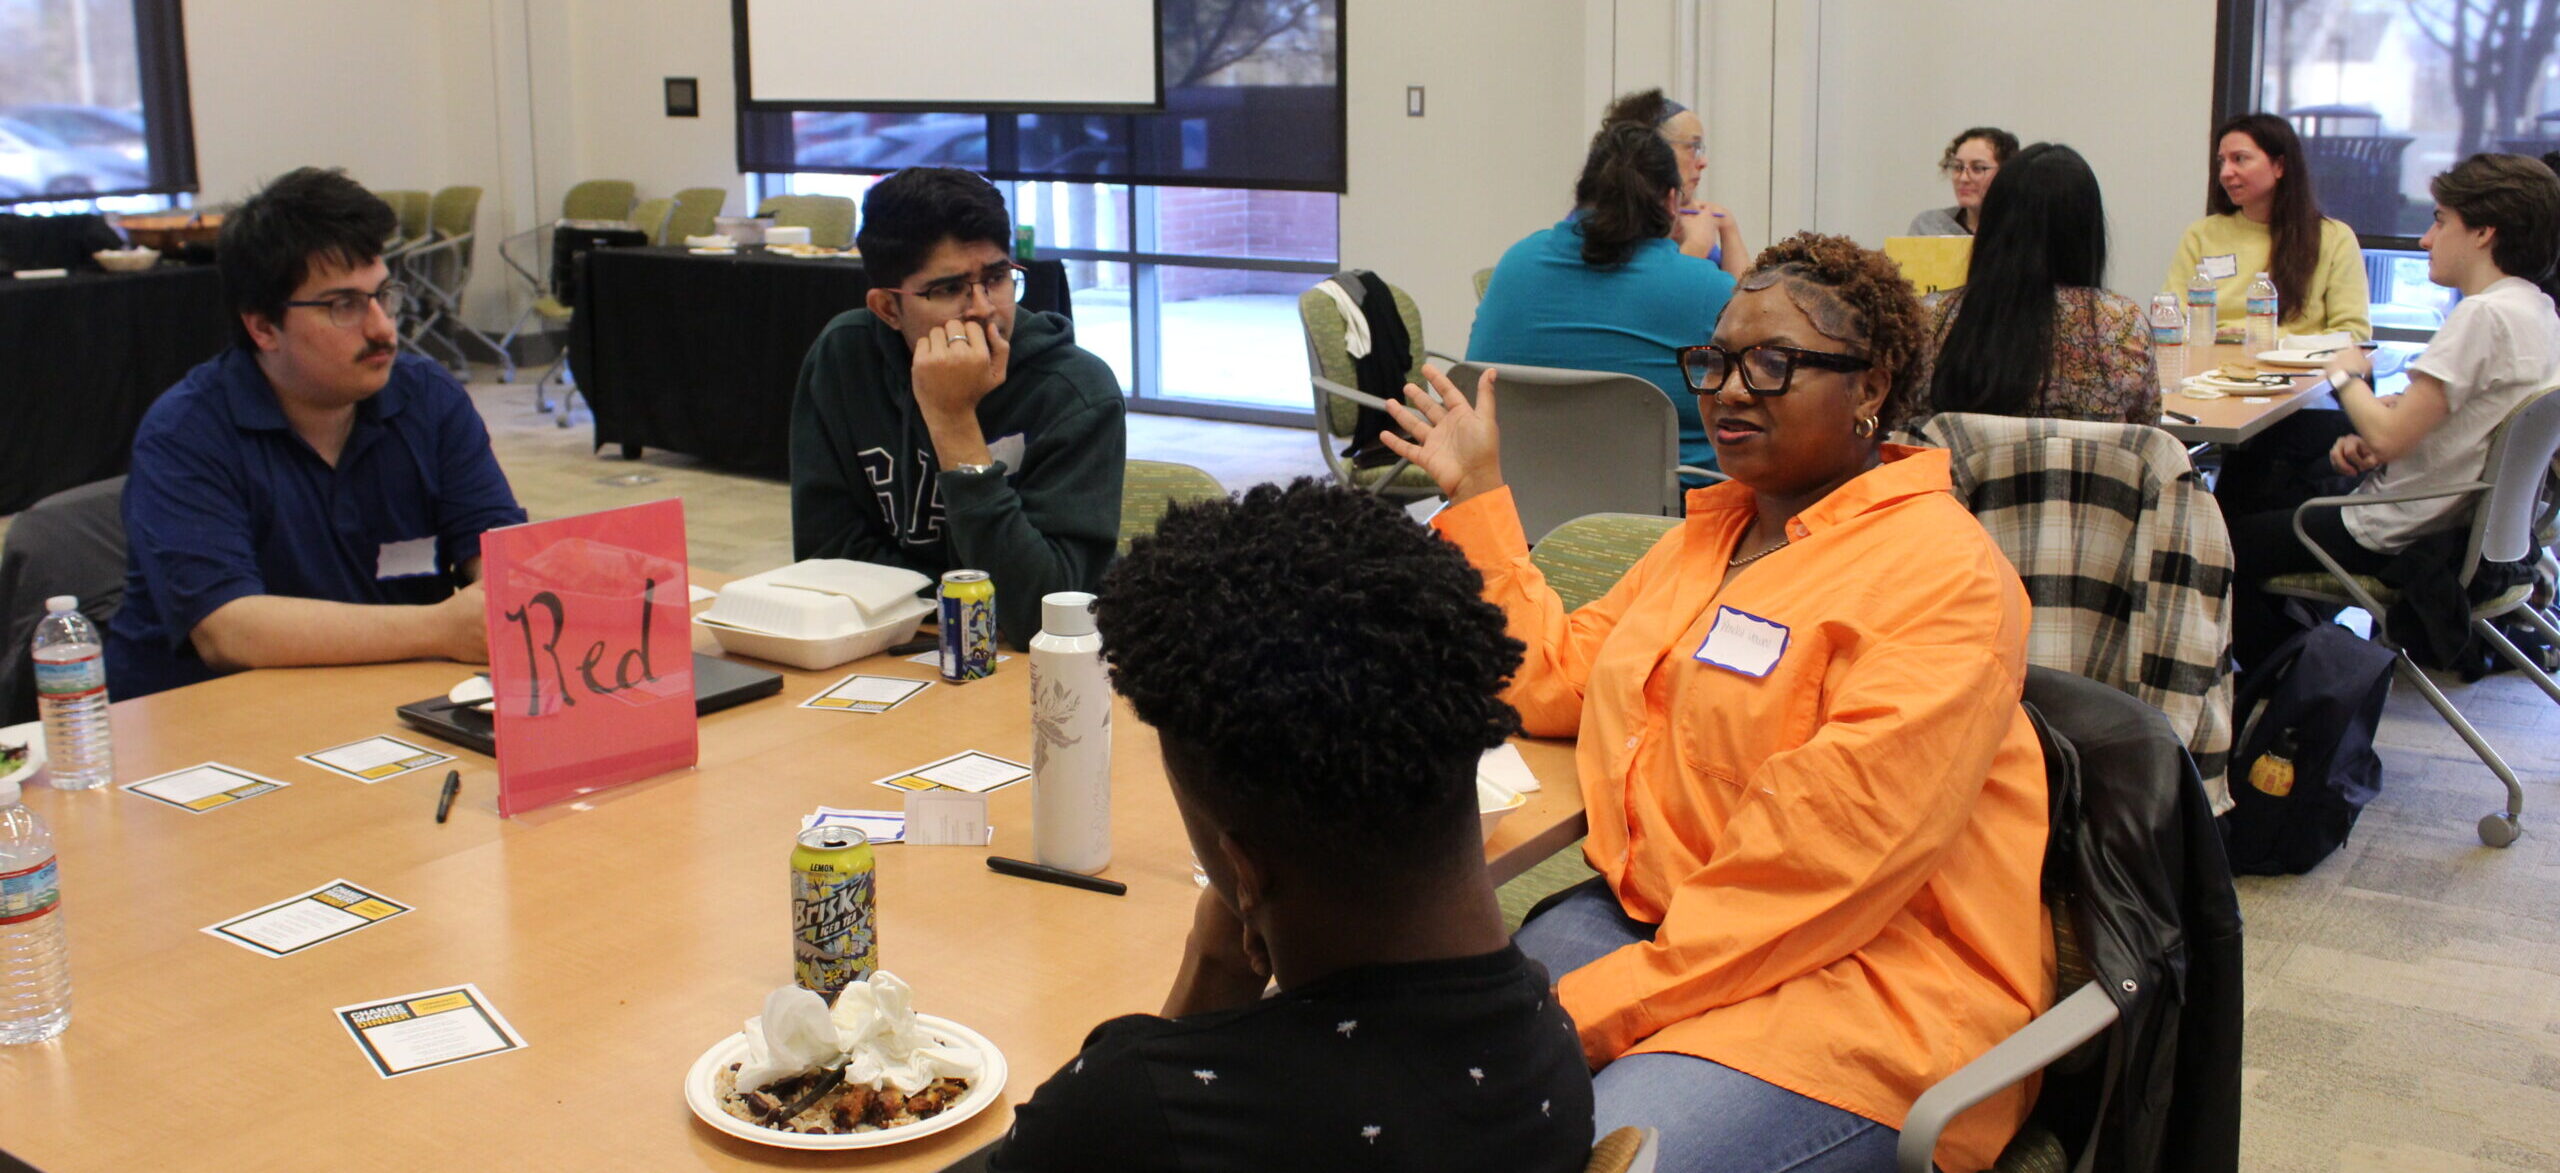 Students talk with a local change maker about how to make a difference in food justice